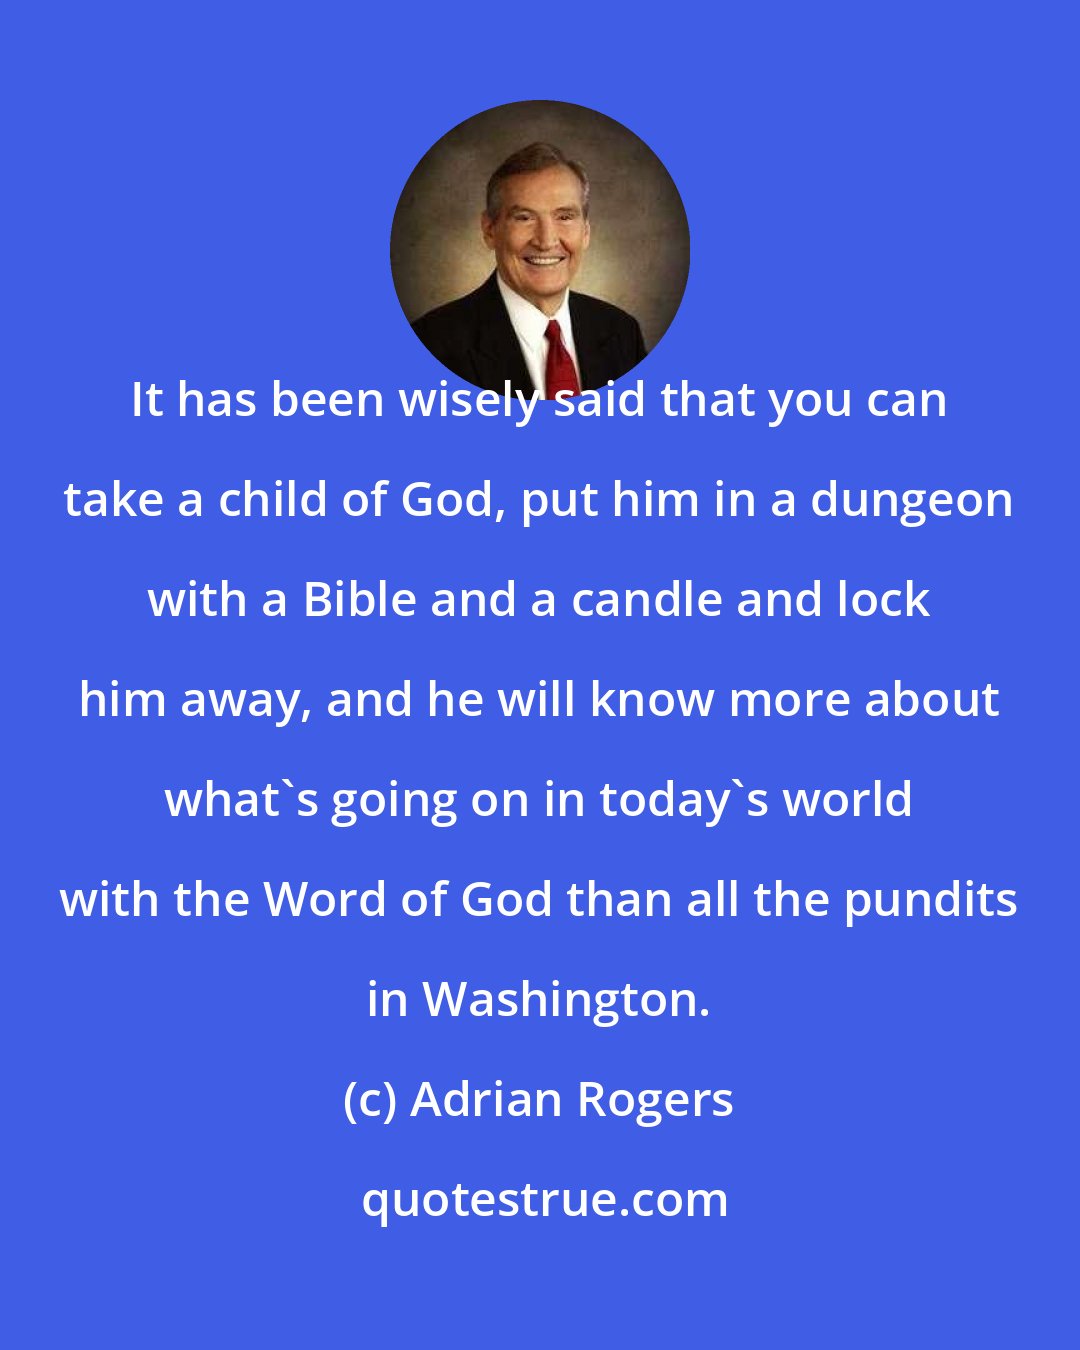 Adrian Rogers: It has been wisely said that you can take a child of God, put him in a dungeon with a Bible and a candle and lock him away, and he will know more about what's going on in today's world with the Word of God than all the pundits in Washington.